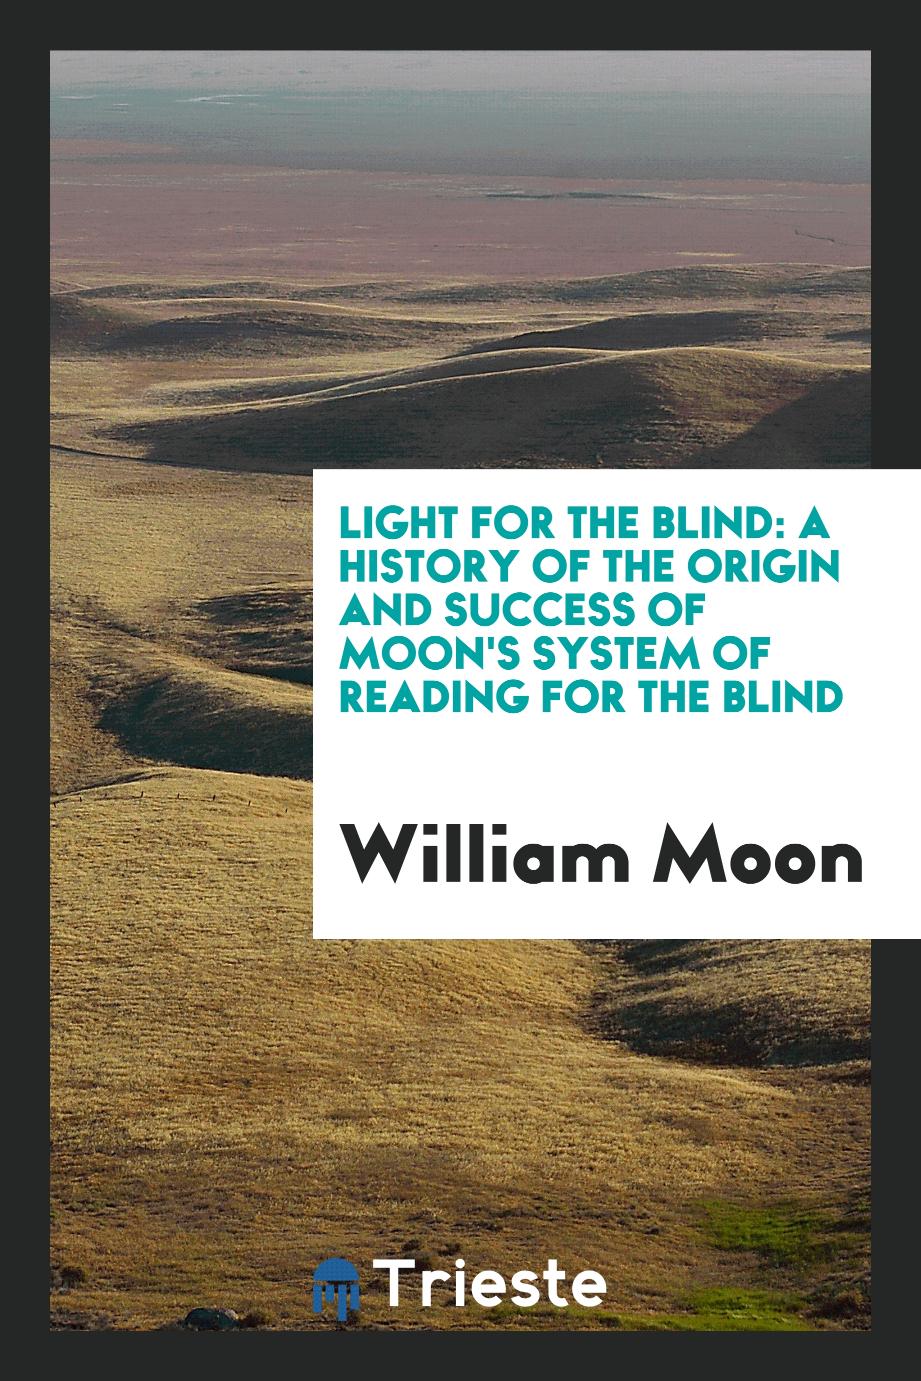 Light for the Blind: A History of the Origin and Success of Moon's System of Reading for the Blind